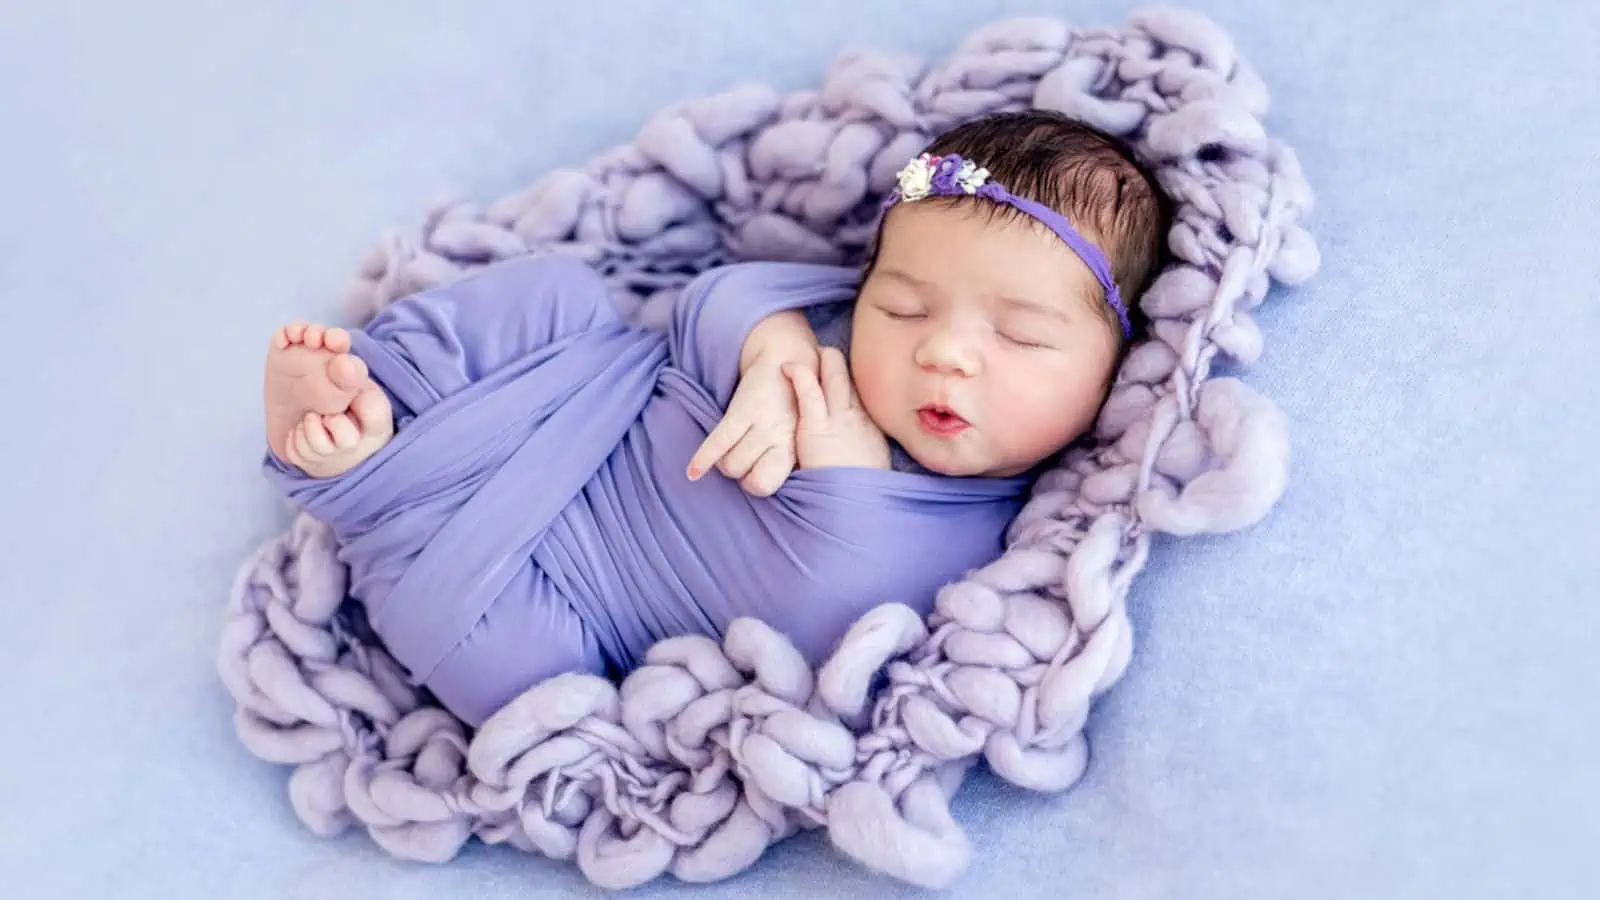 Cute newborn baby wrapped in purple blanked